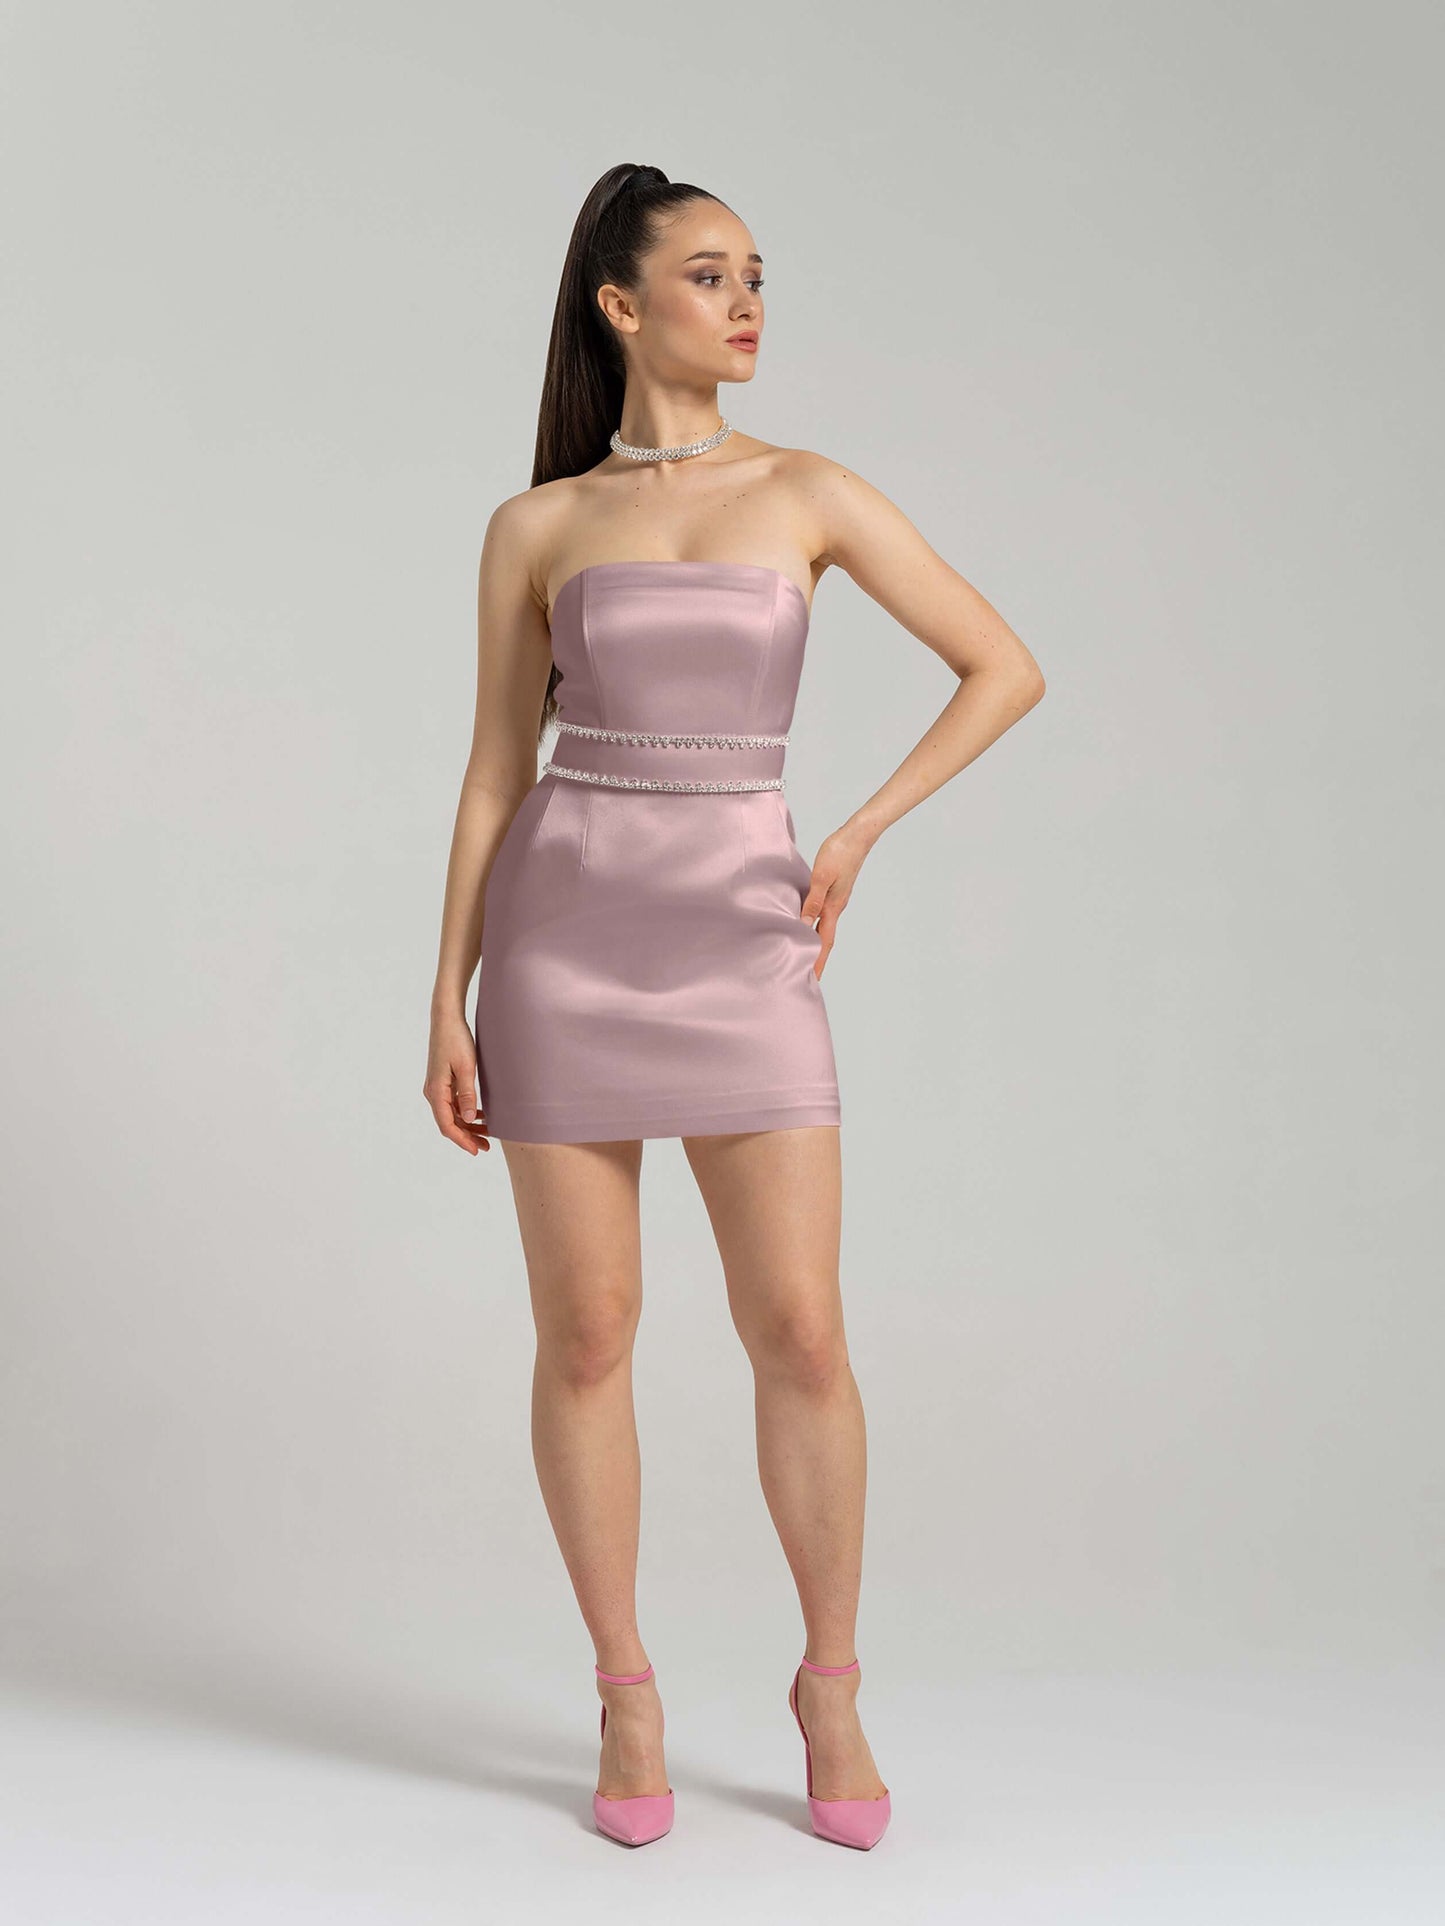 Elevated Excellence Mini Dress - Soft Pink by Tia Dorraine Women's Luxury Fashion Designer Clothing Brand